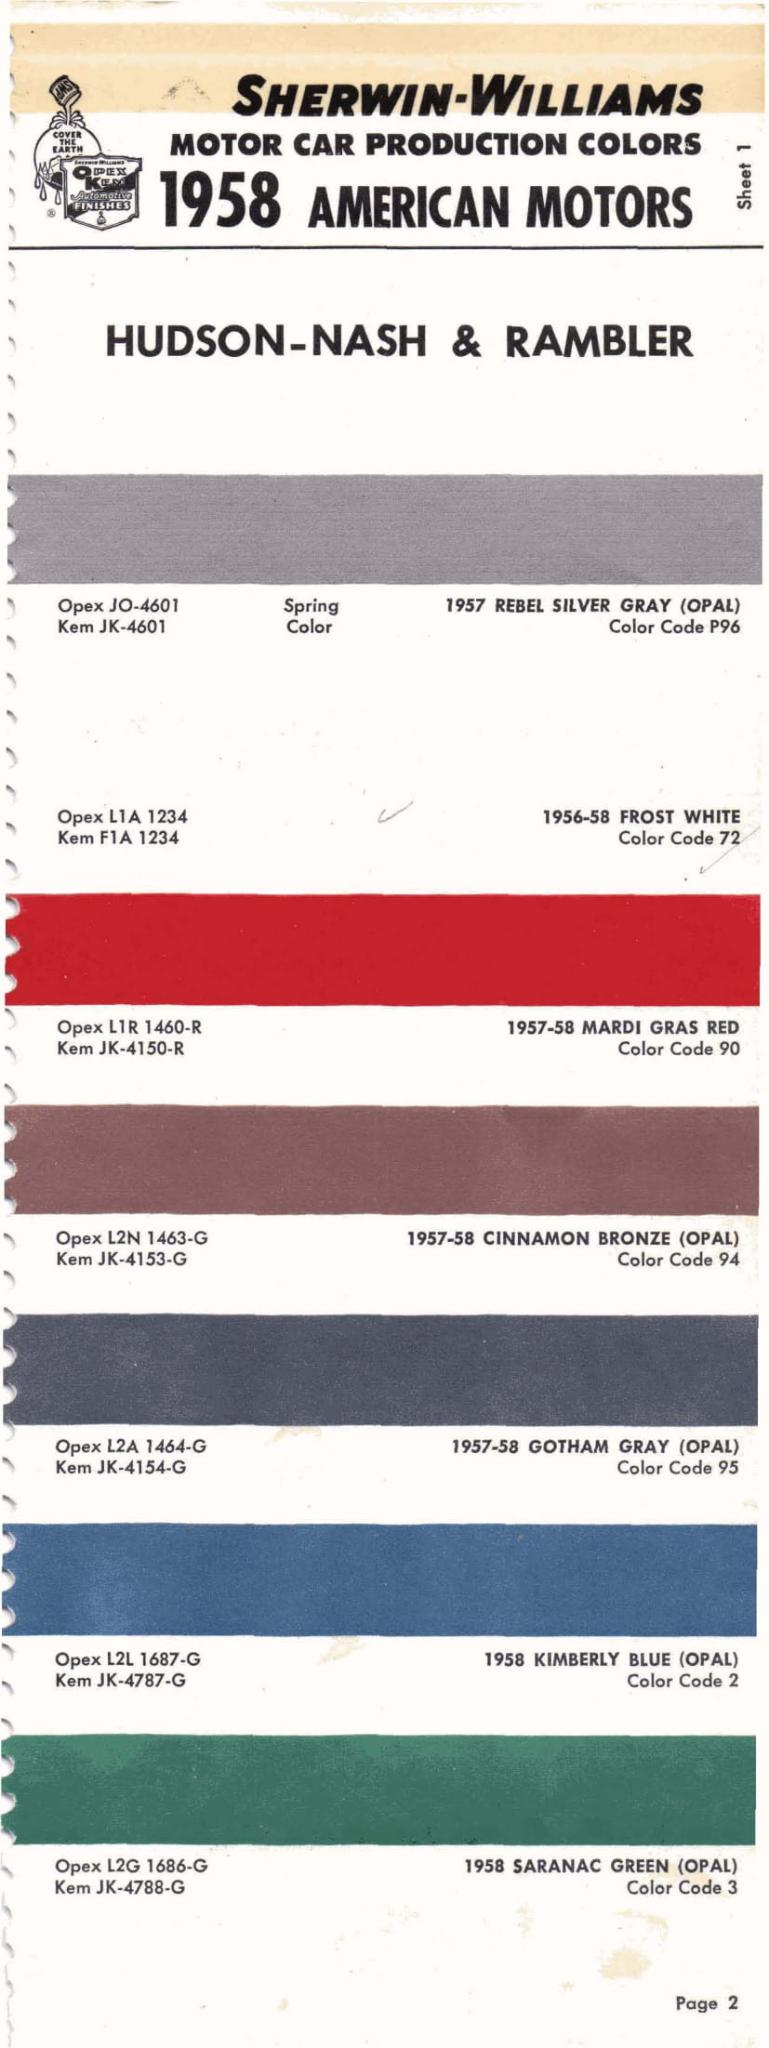 Paint Codes and examples used on Hudson, Nash and Rambler in 1958